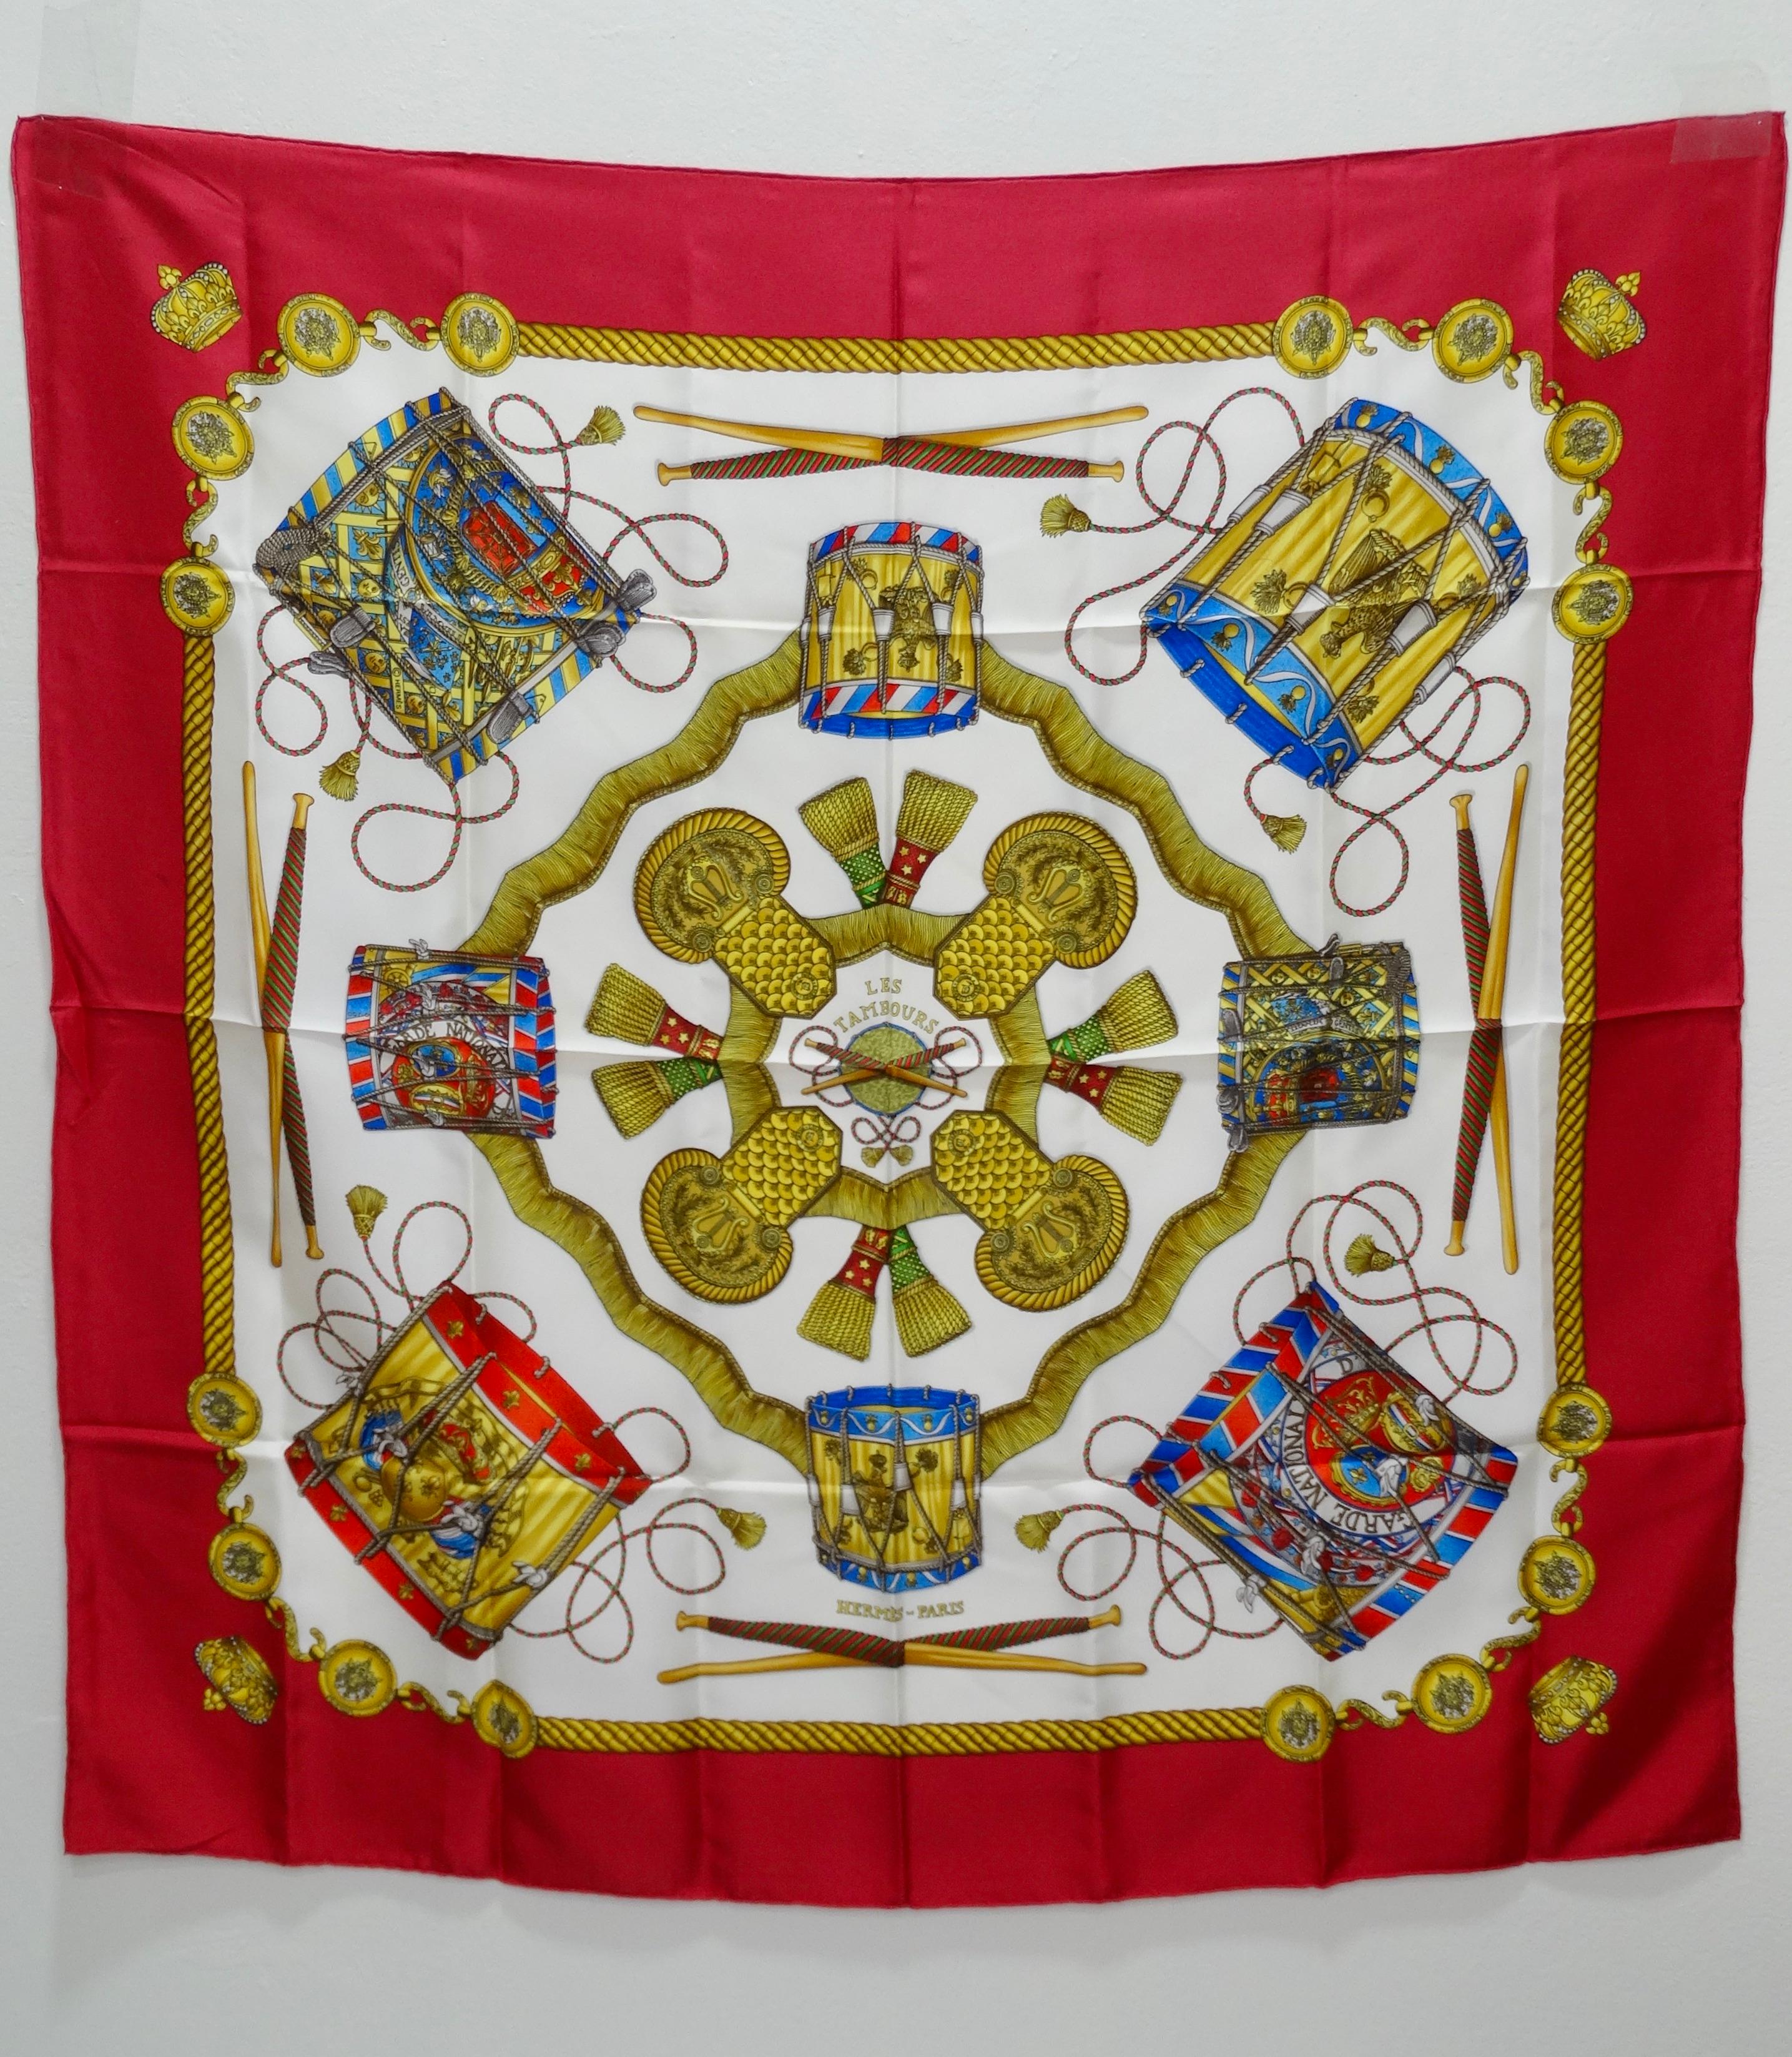 Designed by Joachim Metz in 1989, this beautiful scarf depicts drums used by the battalion drummers, who were part of the Imperial Guard under Napoleon III in the mid 18th century. This stunning scarf features hand-rolled edges and is 100% silk,